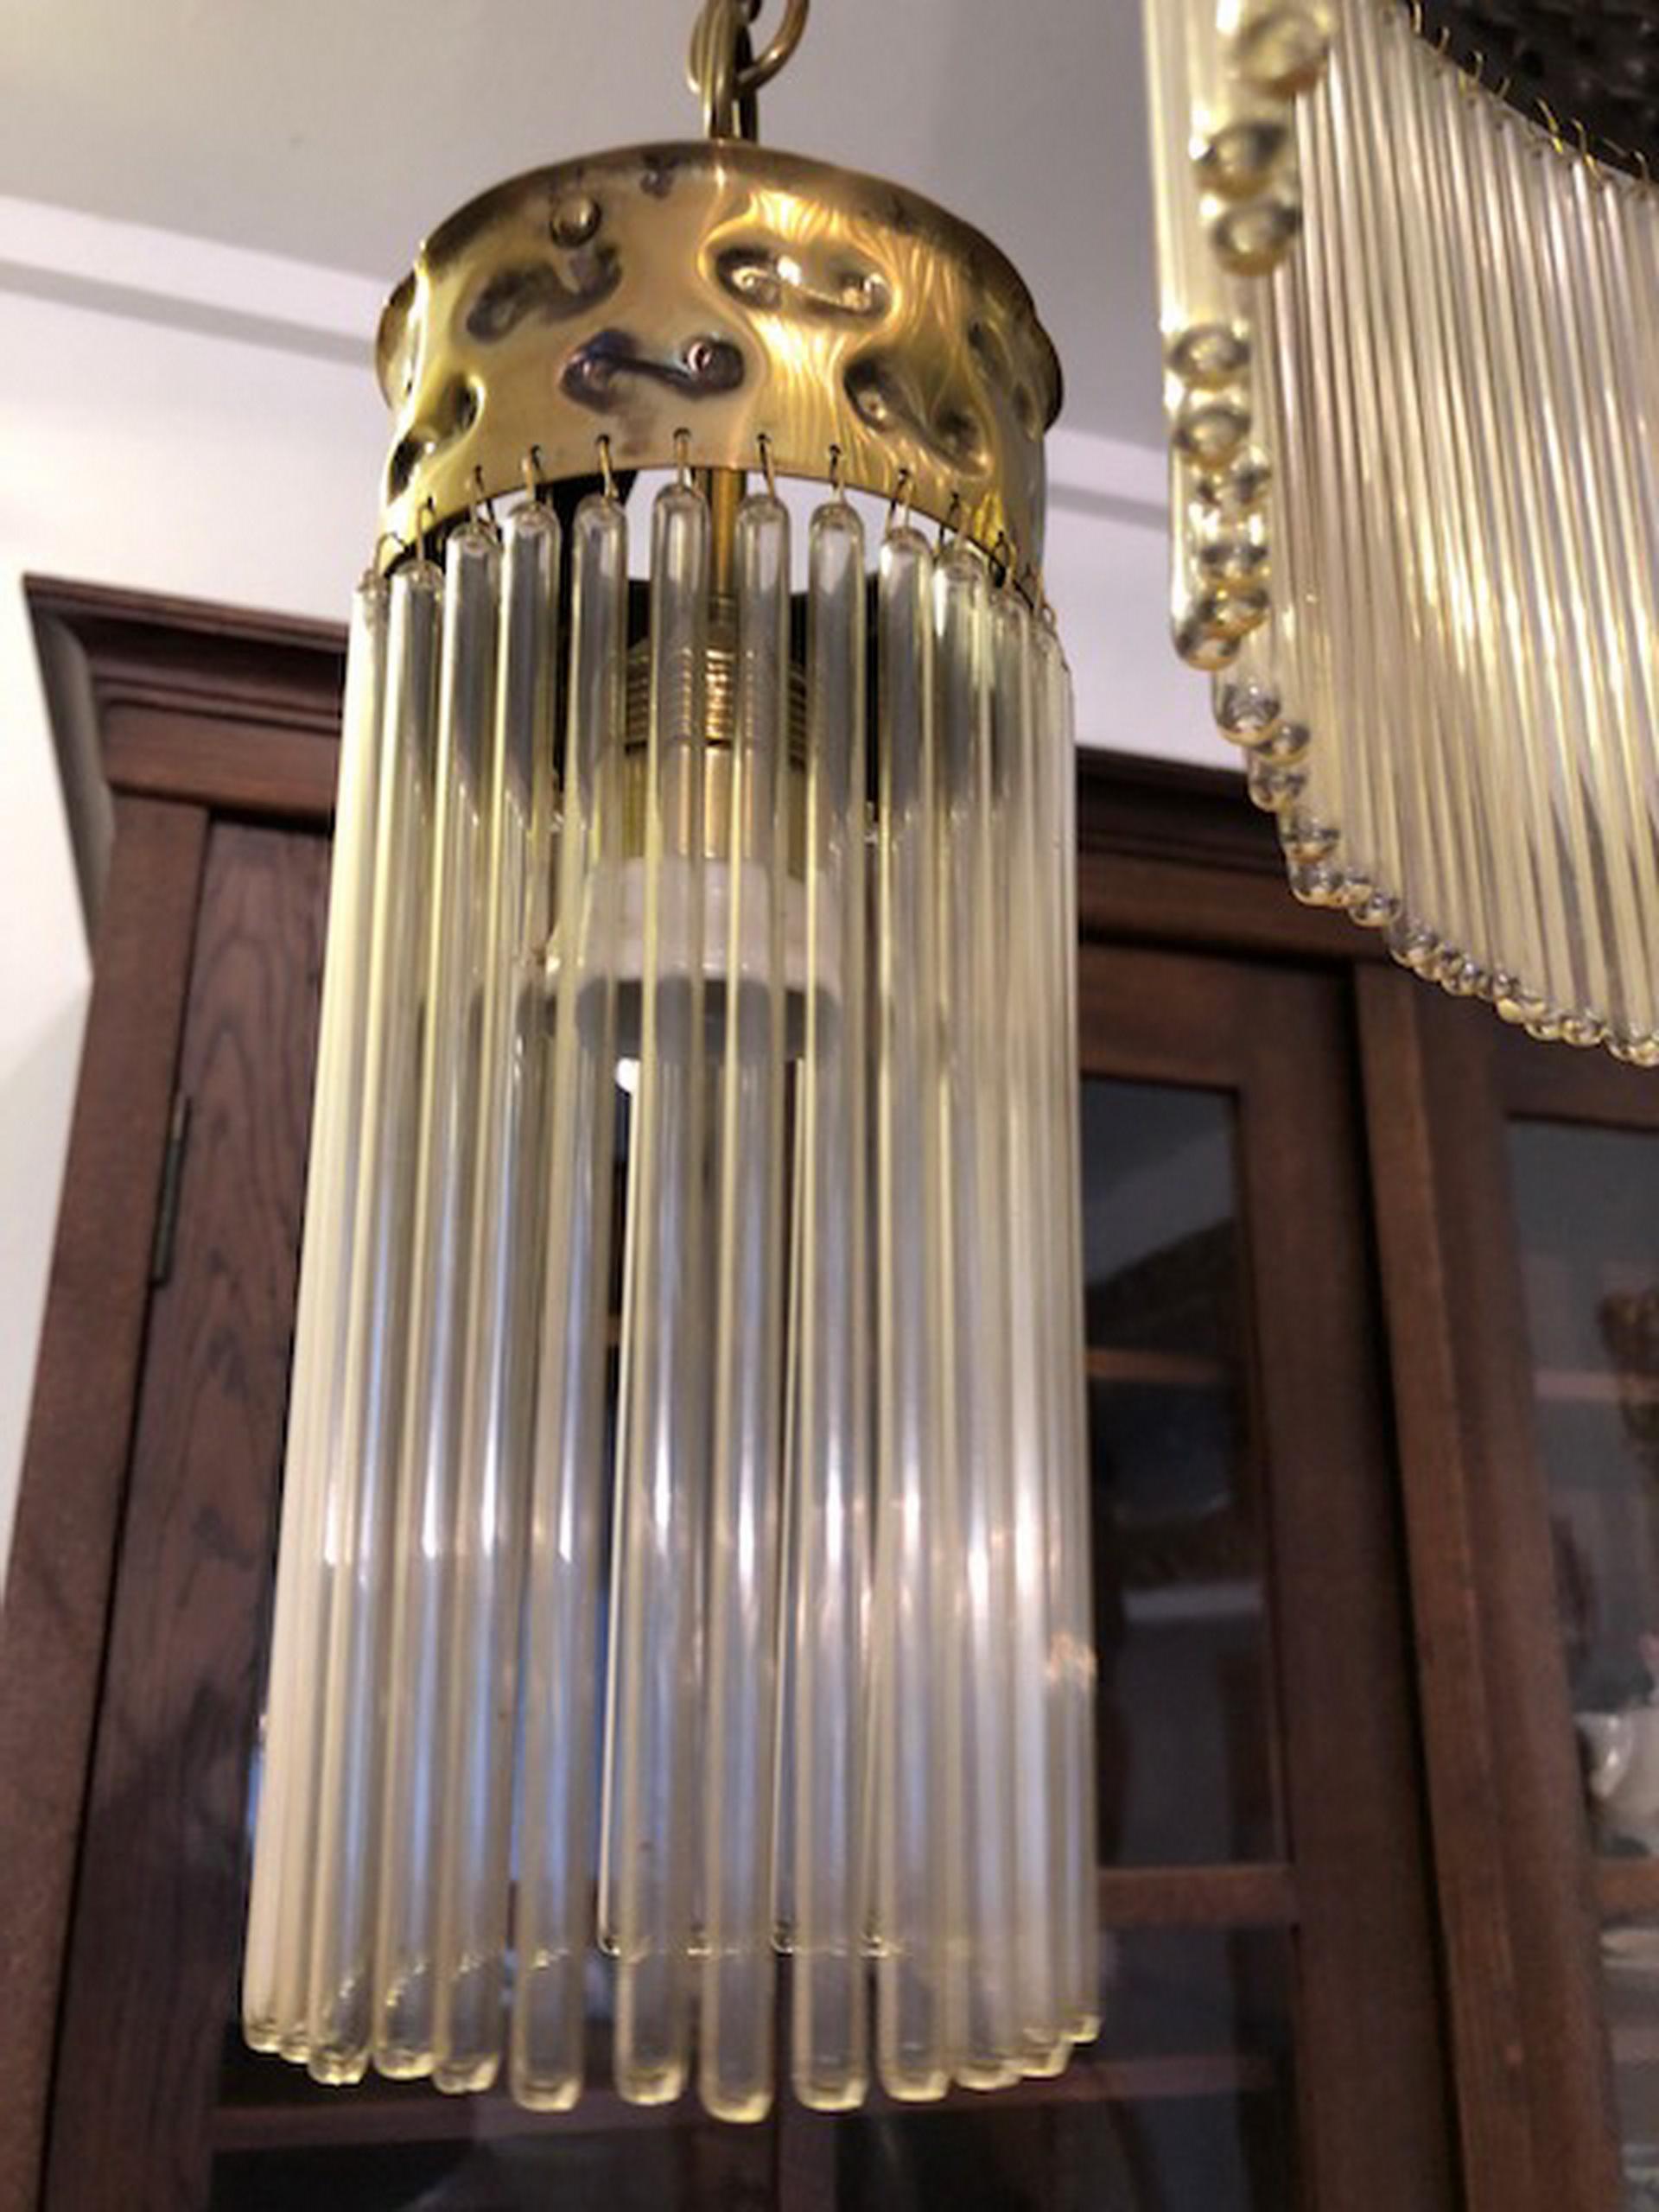 Original Art Deco or Jugendstil hanging lamp chandelier.
A charming, lightly used, very well-preserved and very pretty four-flame chandelier from around 1915.
Was manufactured in Germany and is made of a combination of gold-colored metal, brass